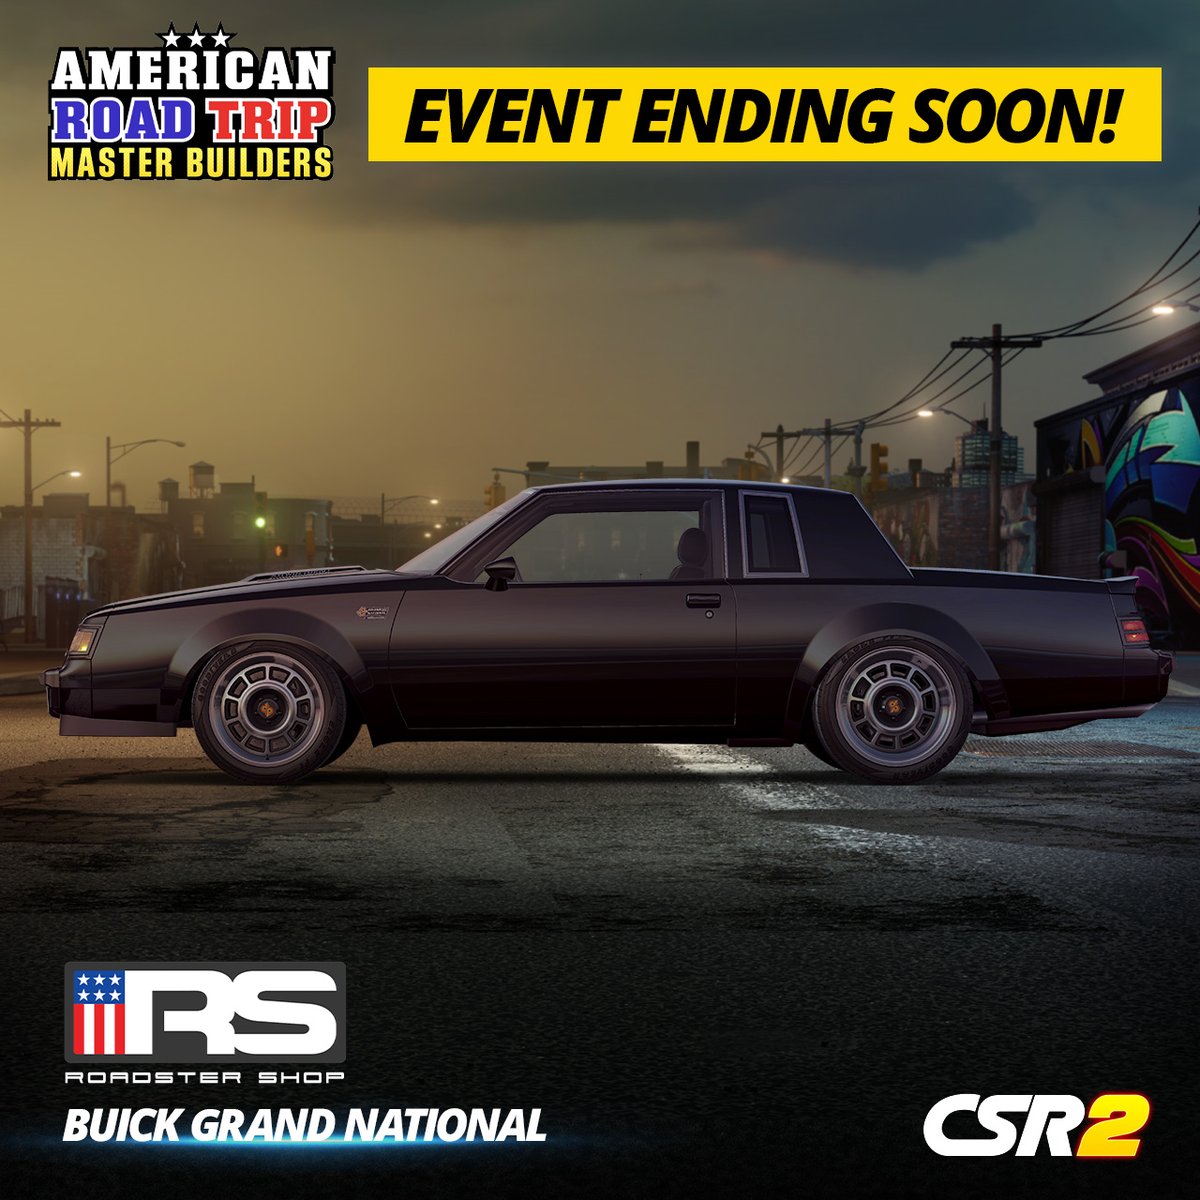 Meet the Buick Grand National: A bold and menacing presence, cloaked in black with just a hint of chrome. It's sleek, it's stealthy, it's power on wheels. 🖤🏁

Play the American Road Trip 3: Colorado event before it ends: zynga.social/csr2tw 

#CSR2 #ART3 #AmericanRoadTrip